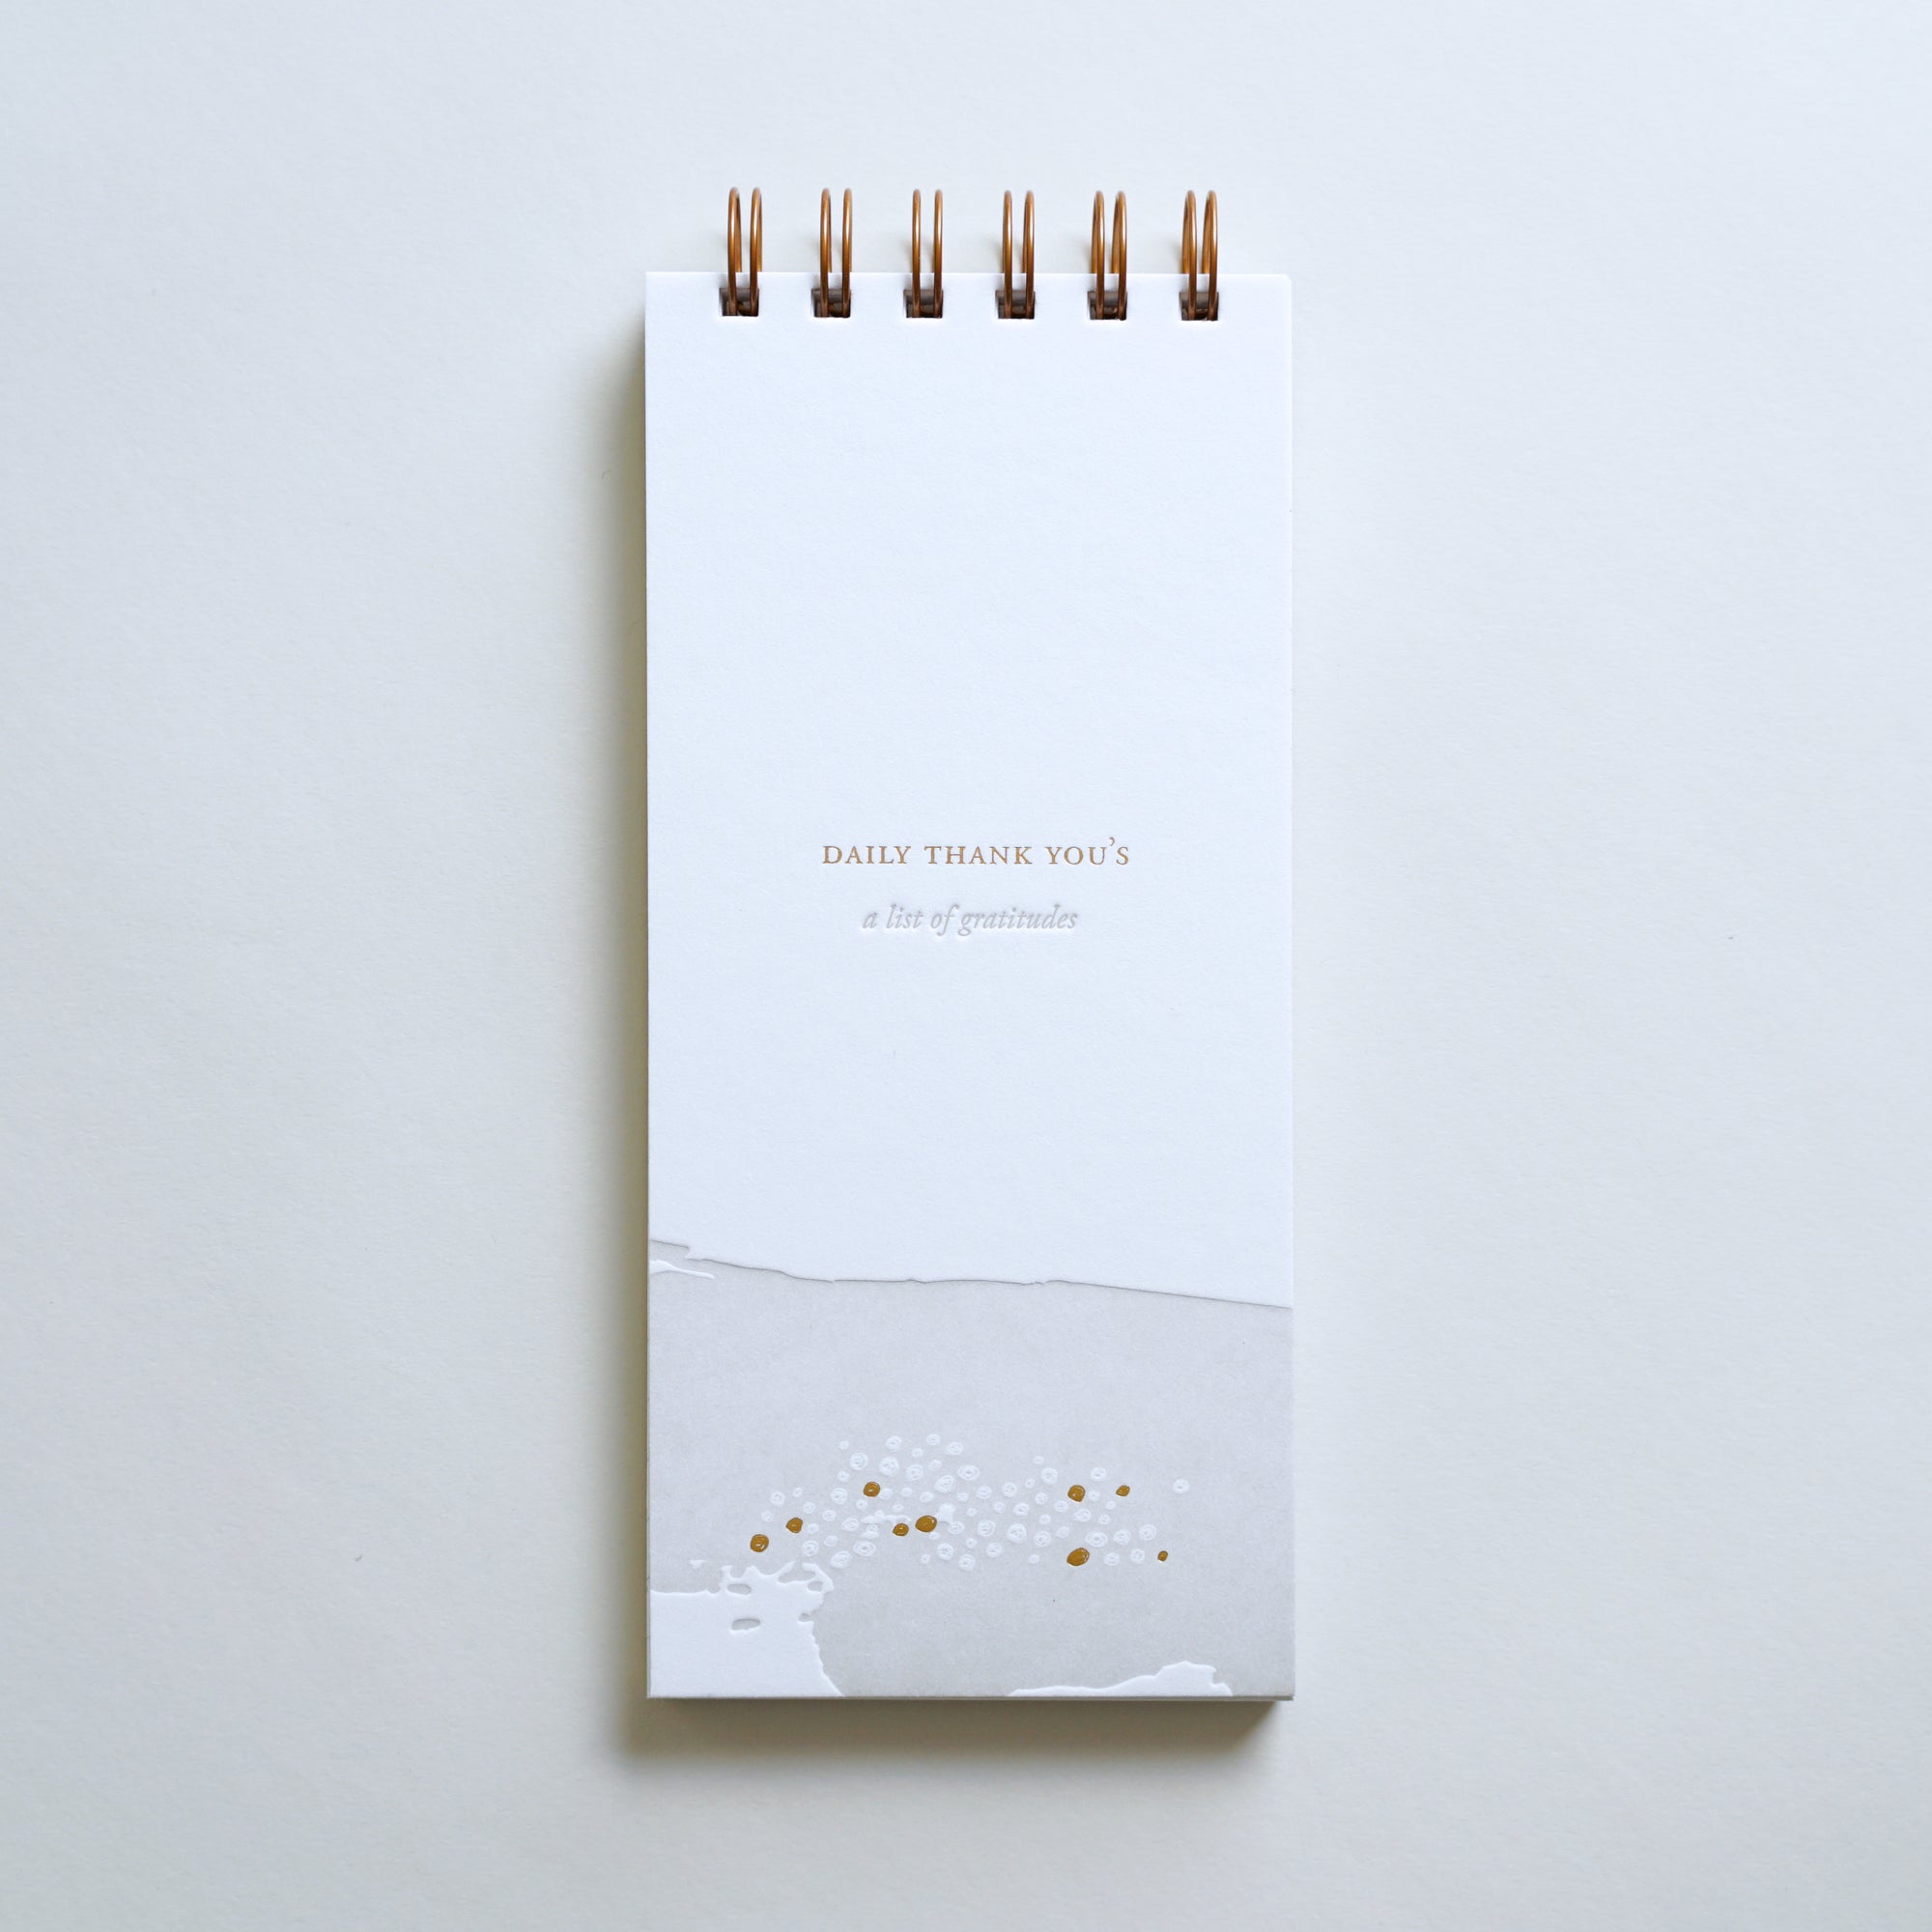 "Daily Thank You's" lined notebook, letterpress printed by hand.